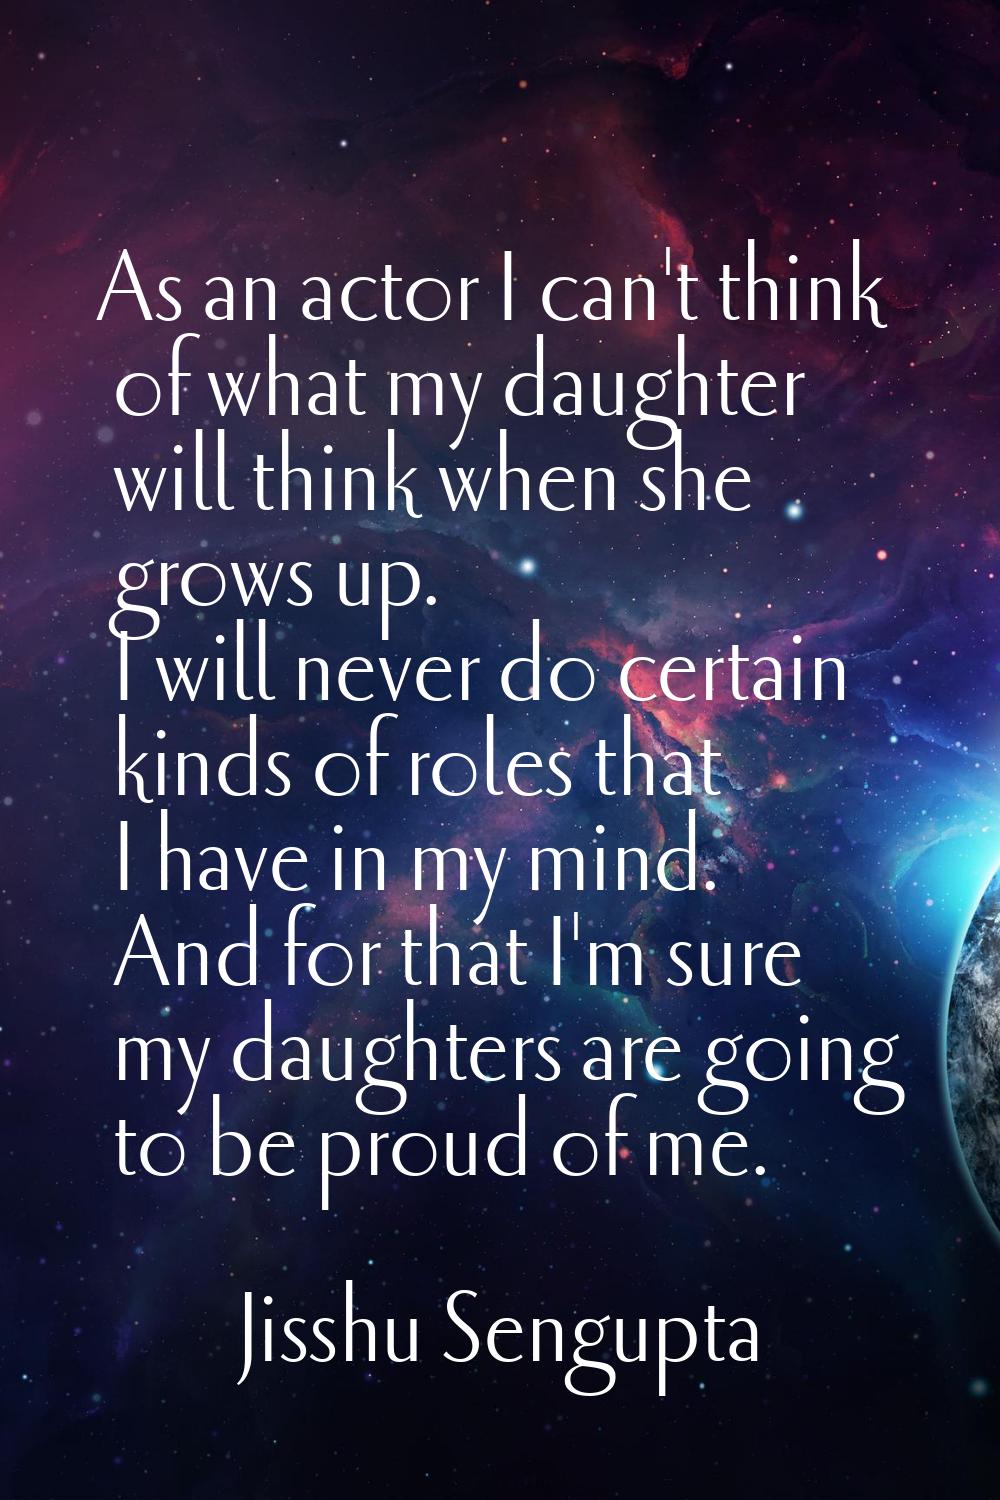 As an actor I can't think of what my daughter will think when she grows up. I will never do certain